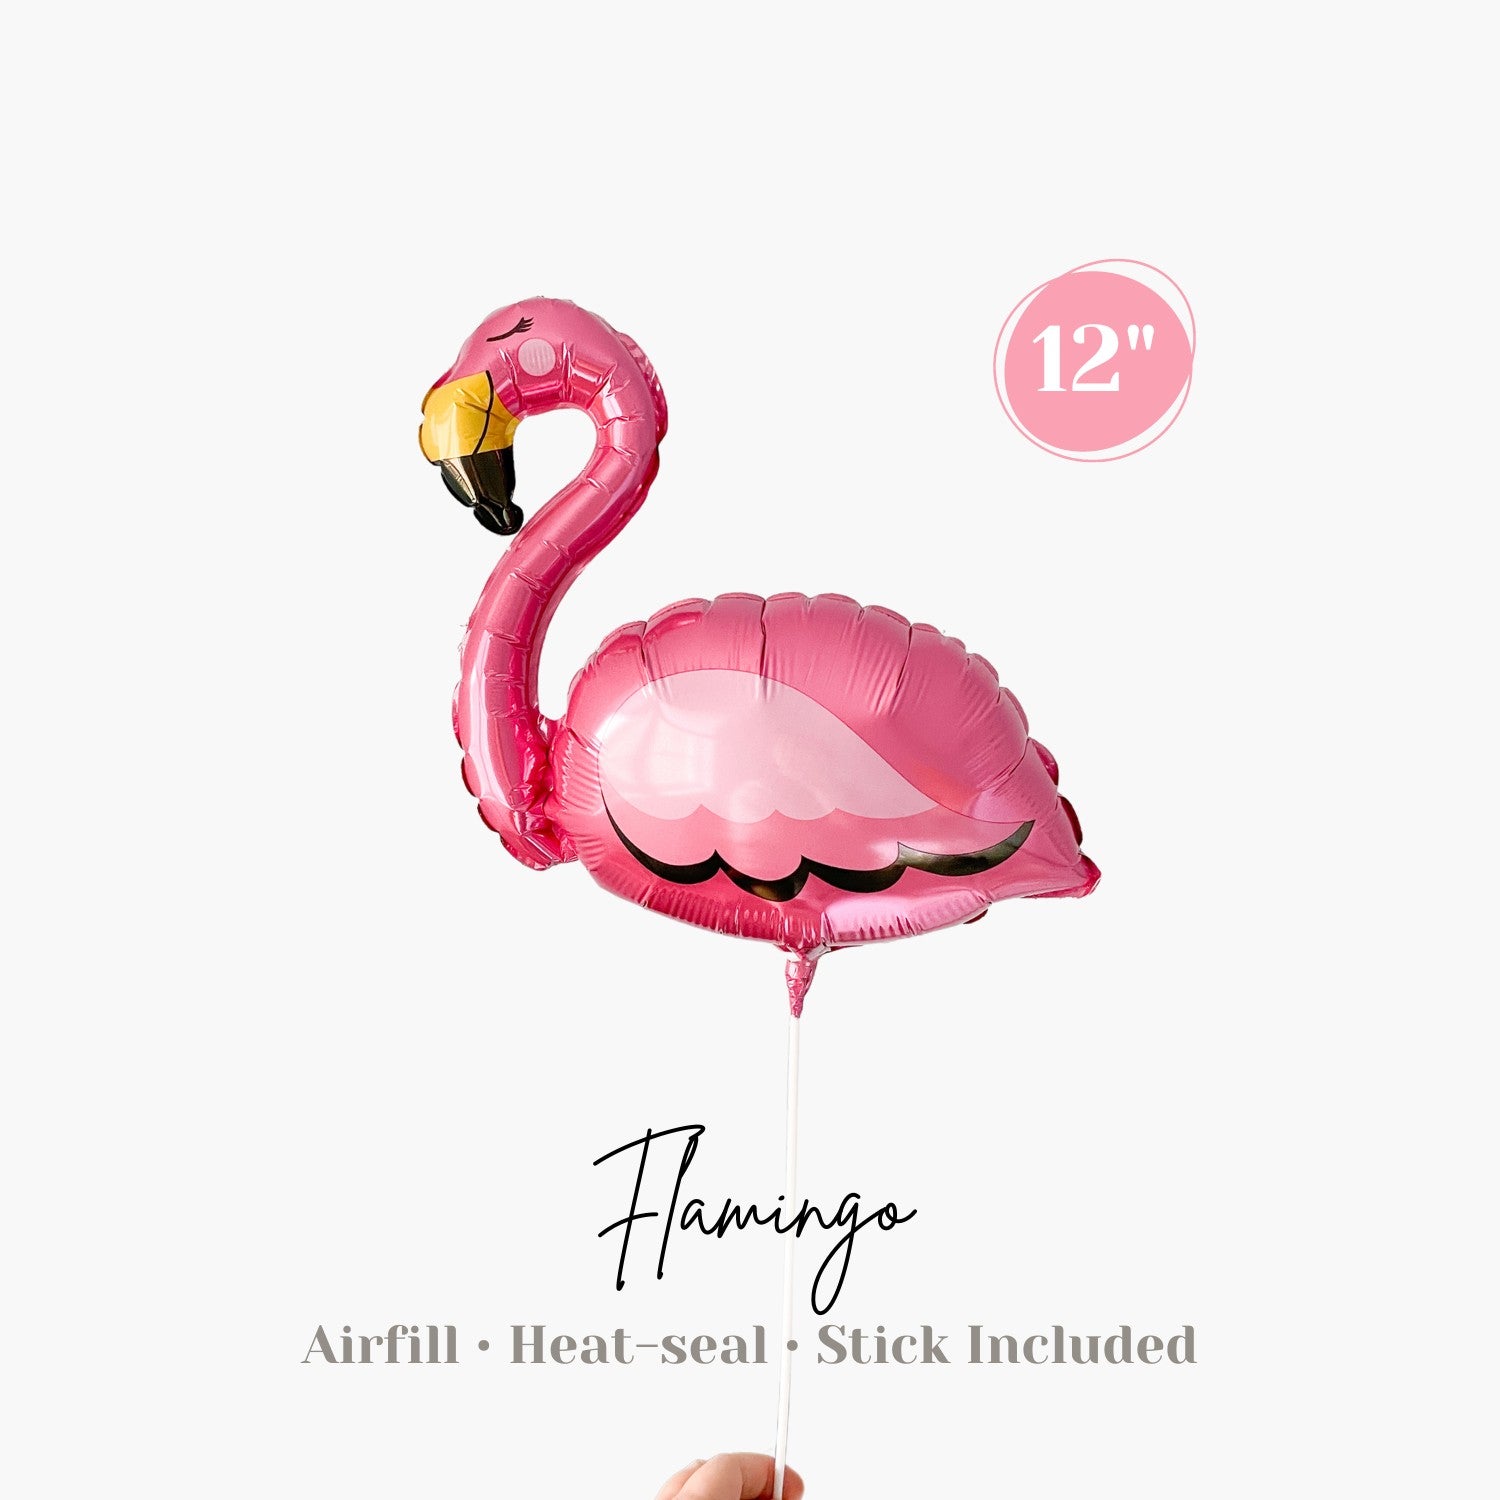 Mini Flamingo Foil Balloon - Airfill & Heat-seal - Tropical Summer Beach Birthday Party Bridal Shower Baby Shower Photo Prop Loot Bag Fillers